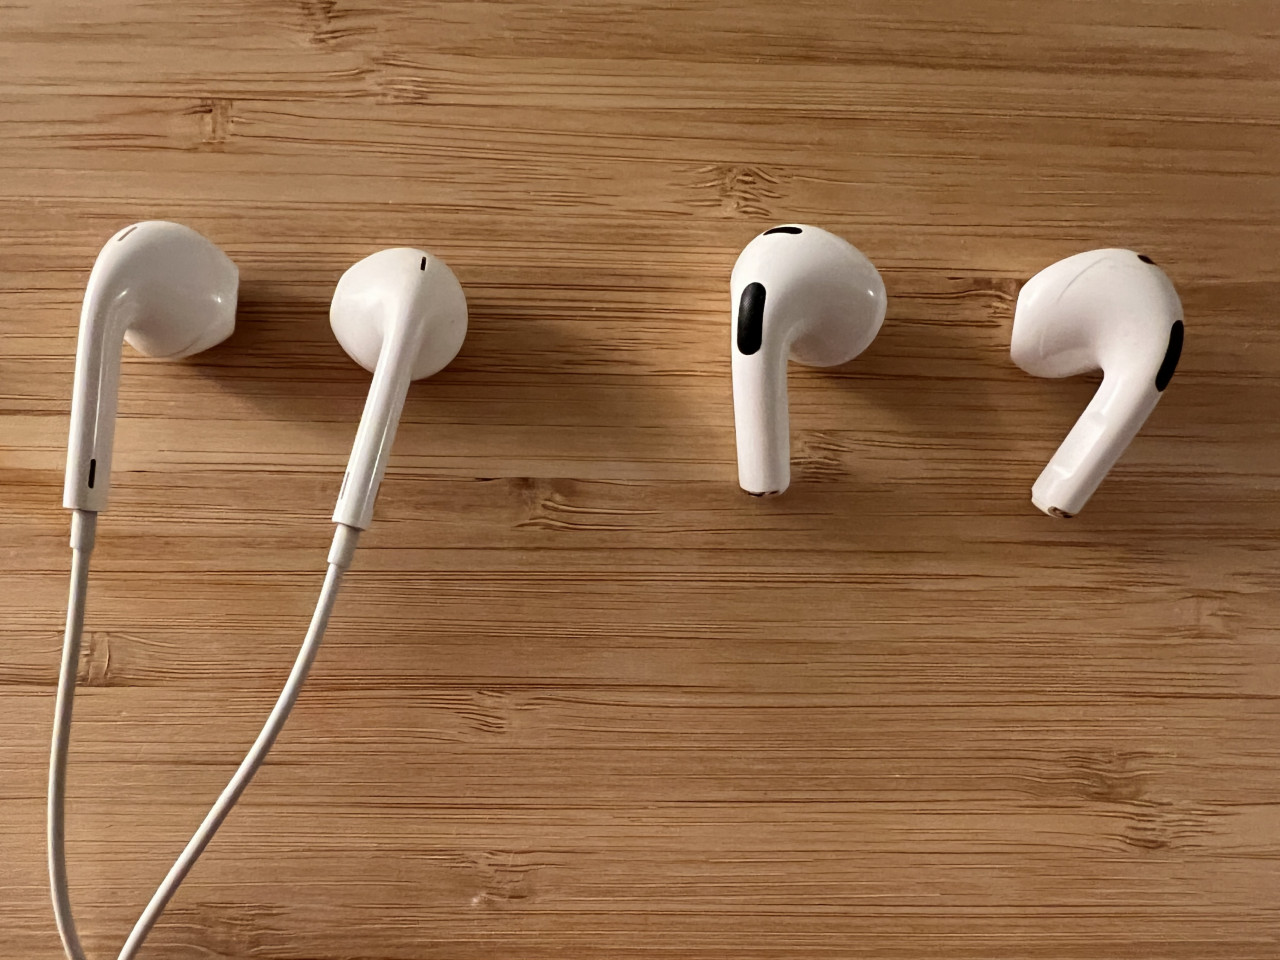 A size comparison between some old Apple earbuds and the new AirPods. – Haikal Fernandez pic